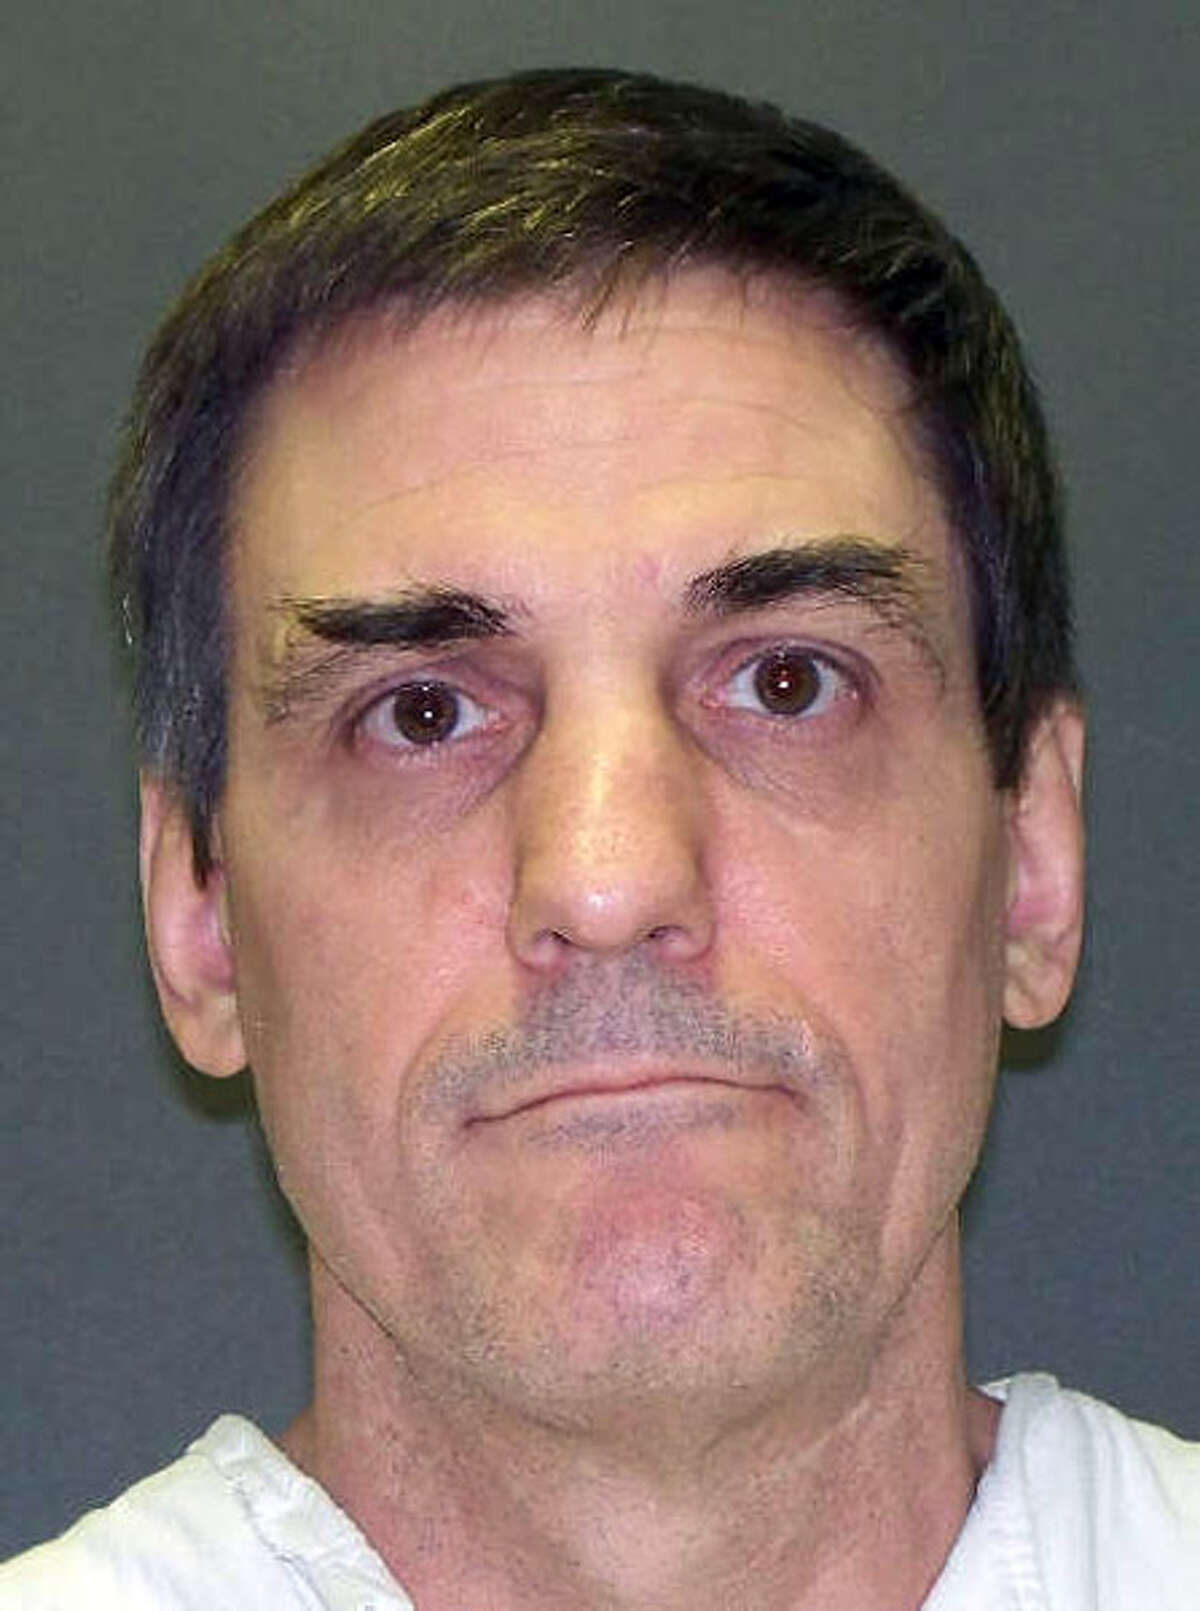 FILE - This file handout photo provided by the Texas Department of Criminal Justice shows Scott Panetti. A federal appeals court has given Panetti a reprieve from execution Wednesday, Dec. 3, 2014. His attorneys say he is too delusional to be put to death. (AP Photo/Texas Department of Criminal Justice)